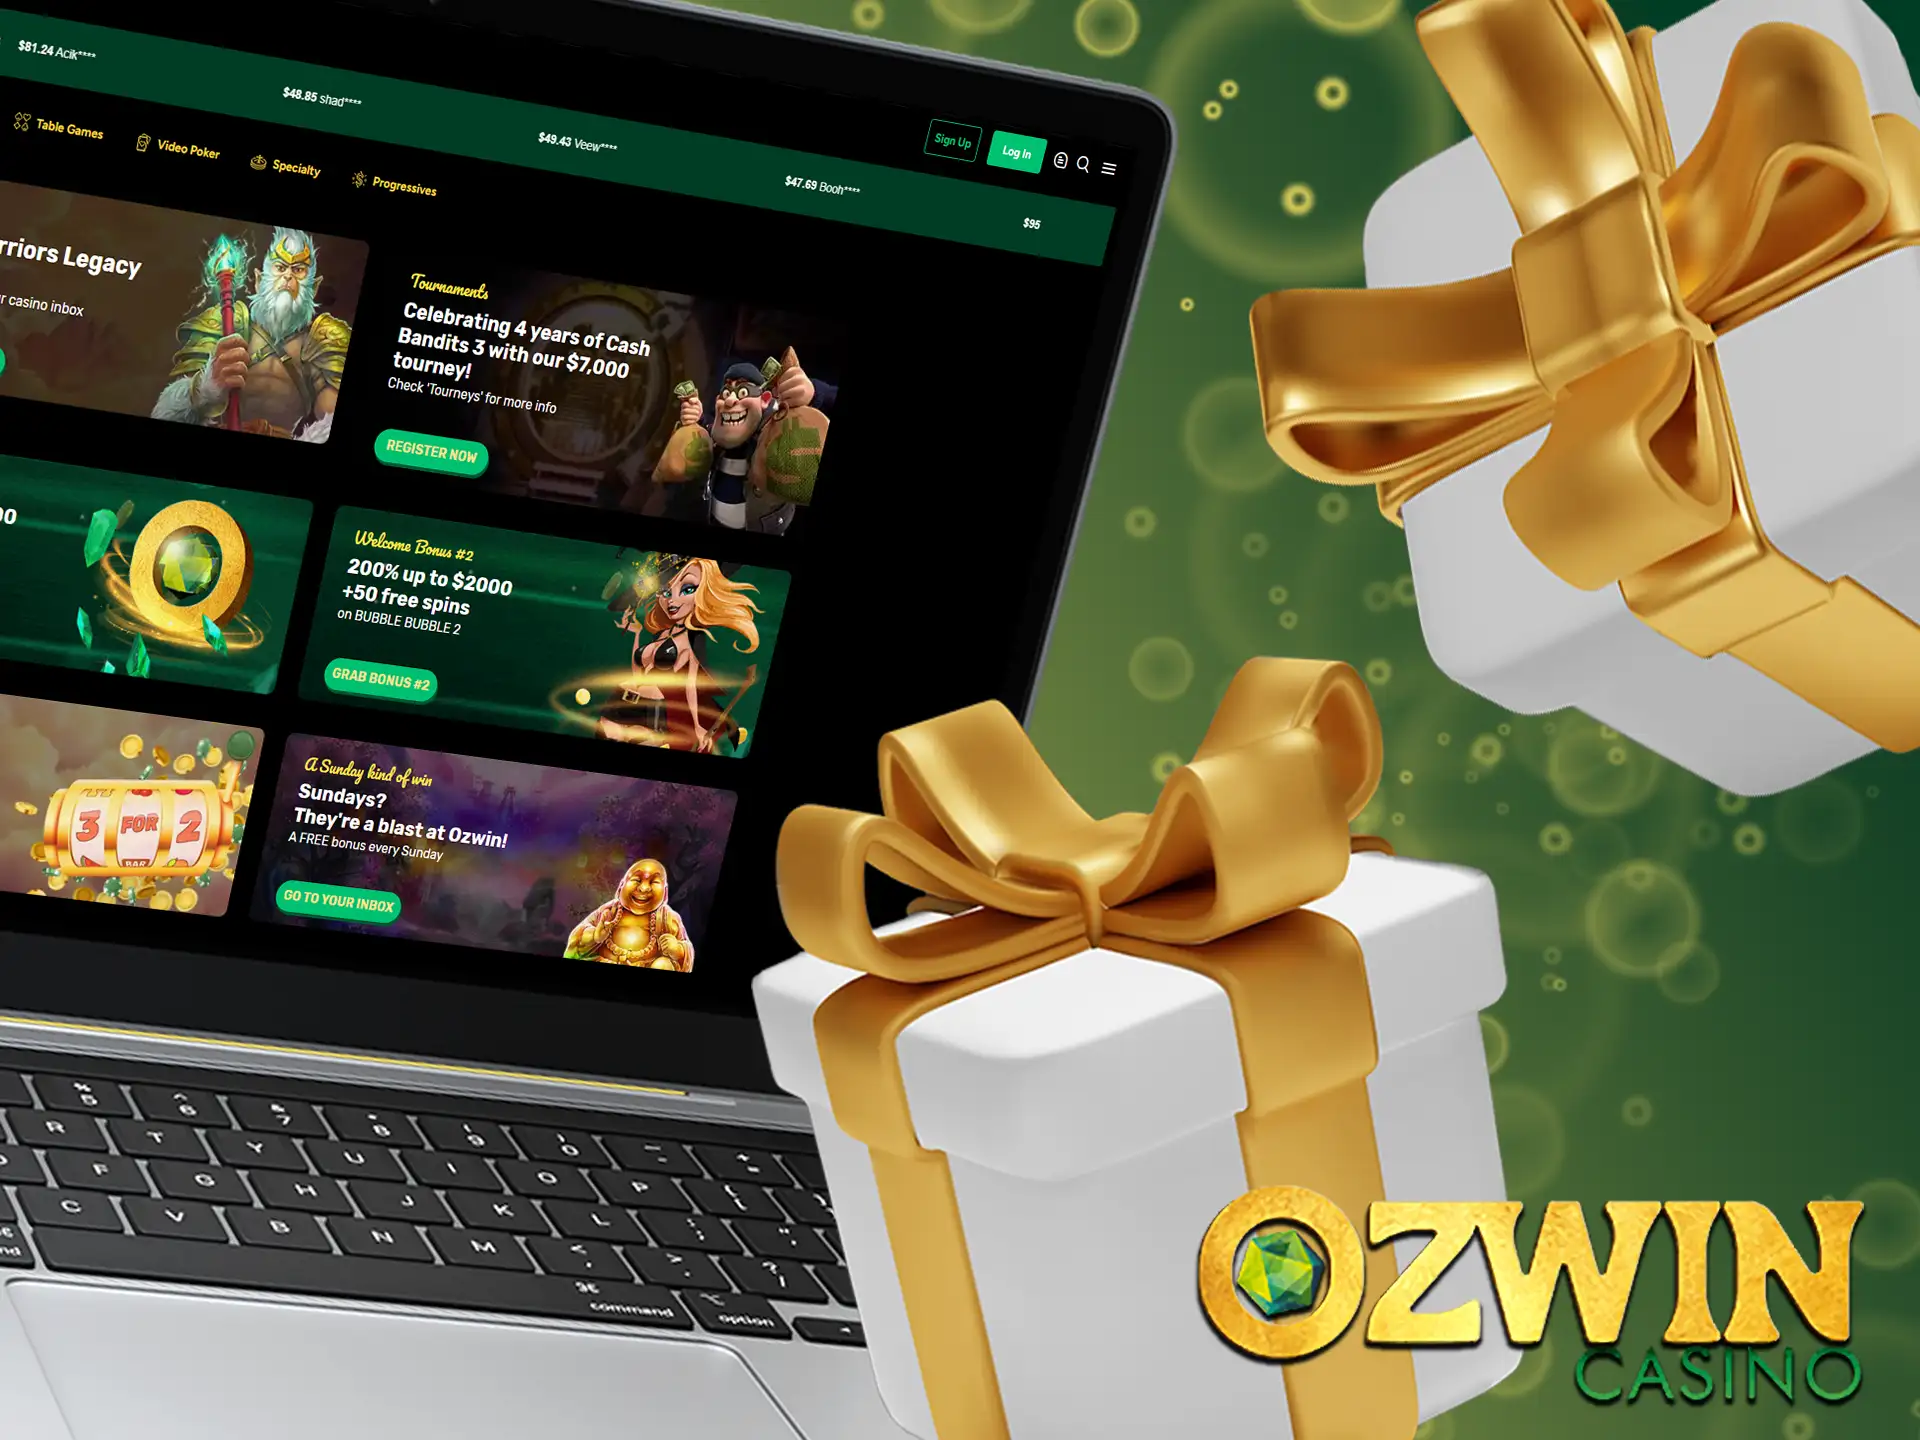 A variety of welcome bonuses are offered by Ozwin.